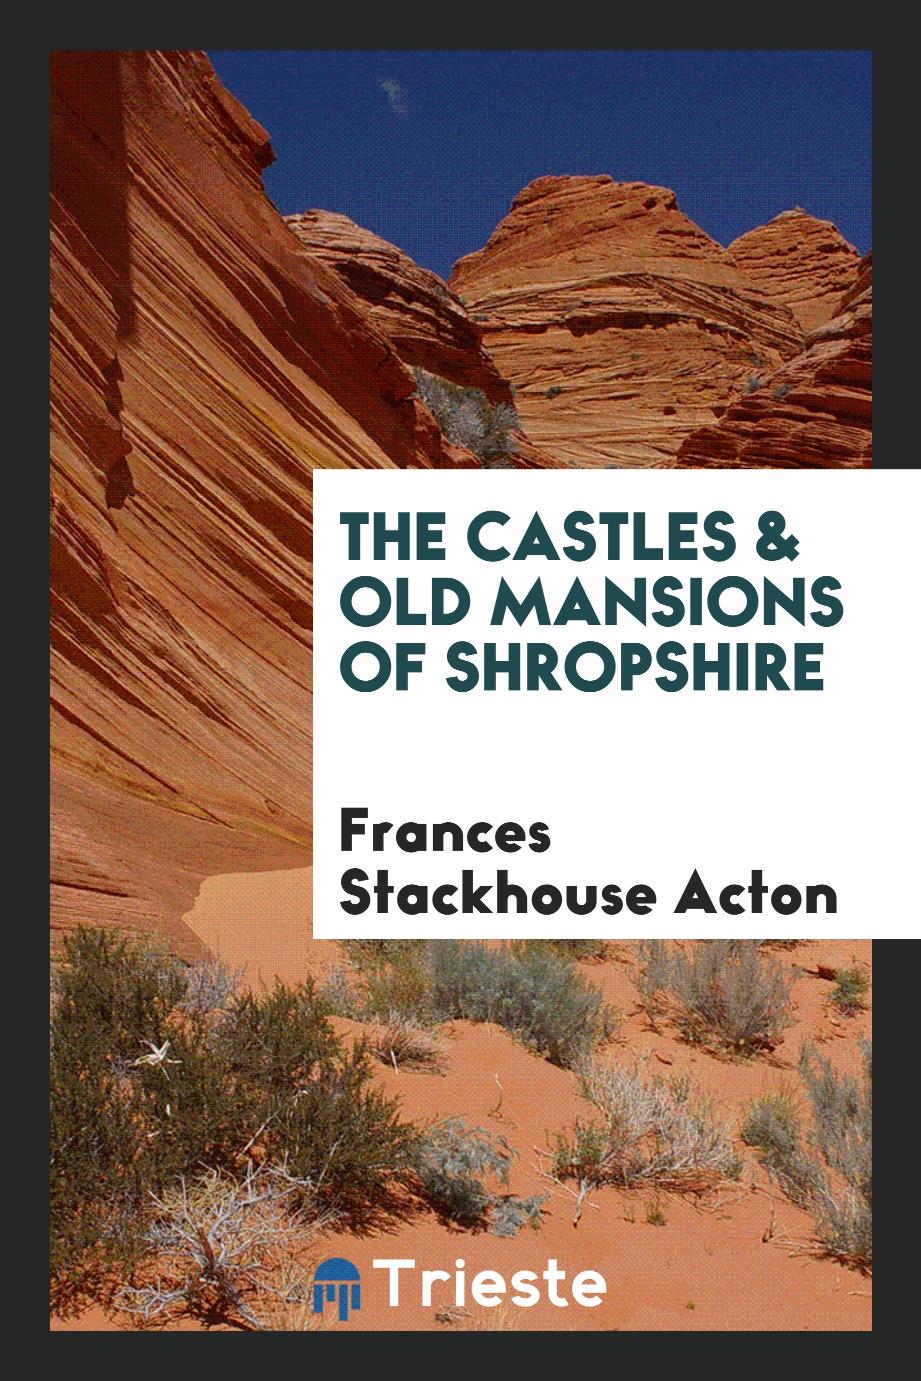 The Castles & Old Mansions of Shropshire